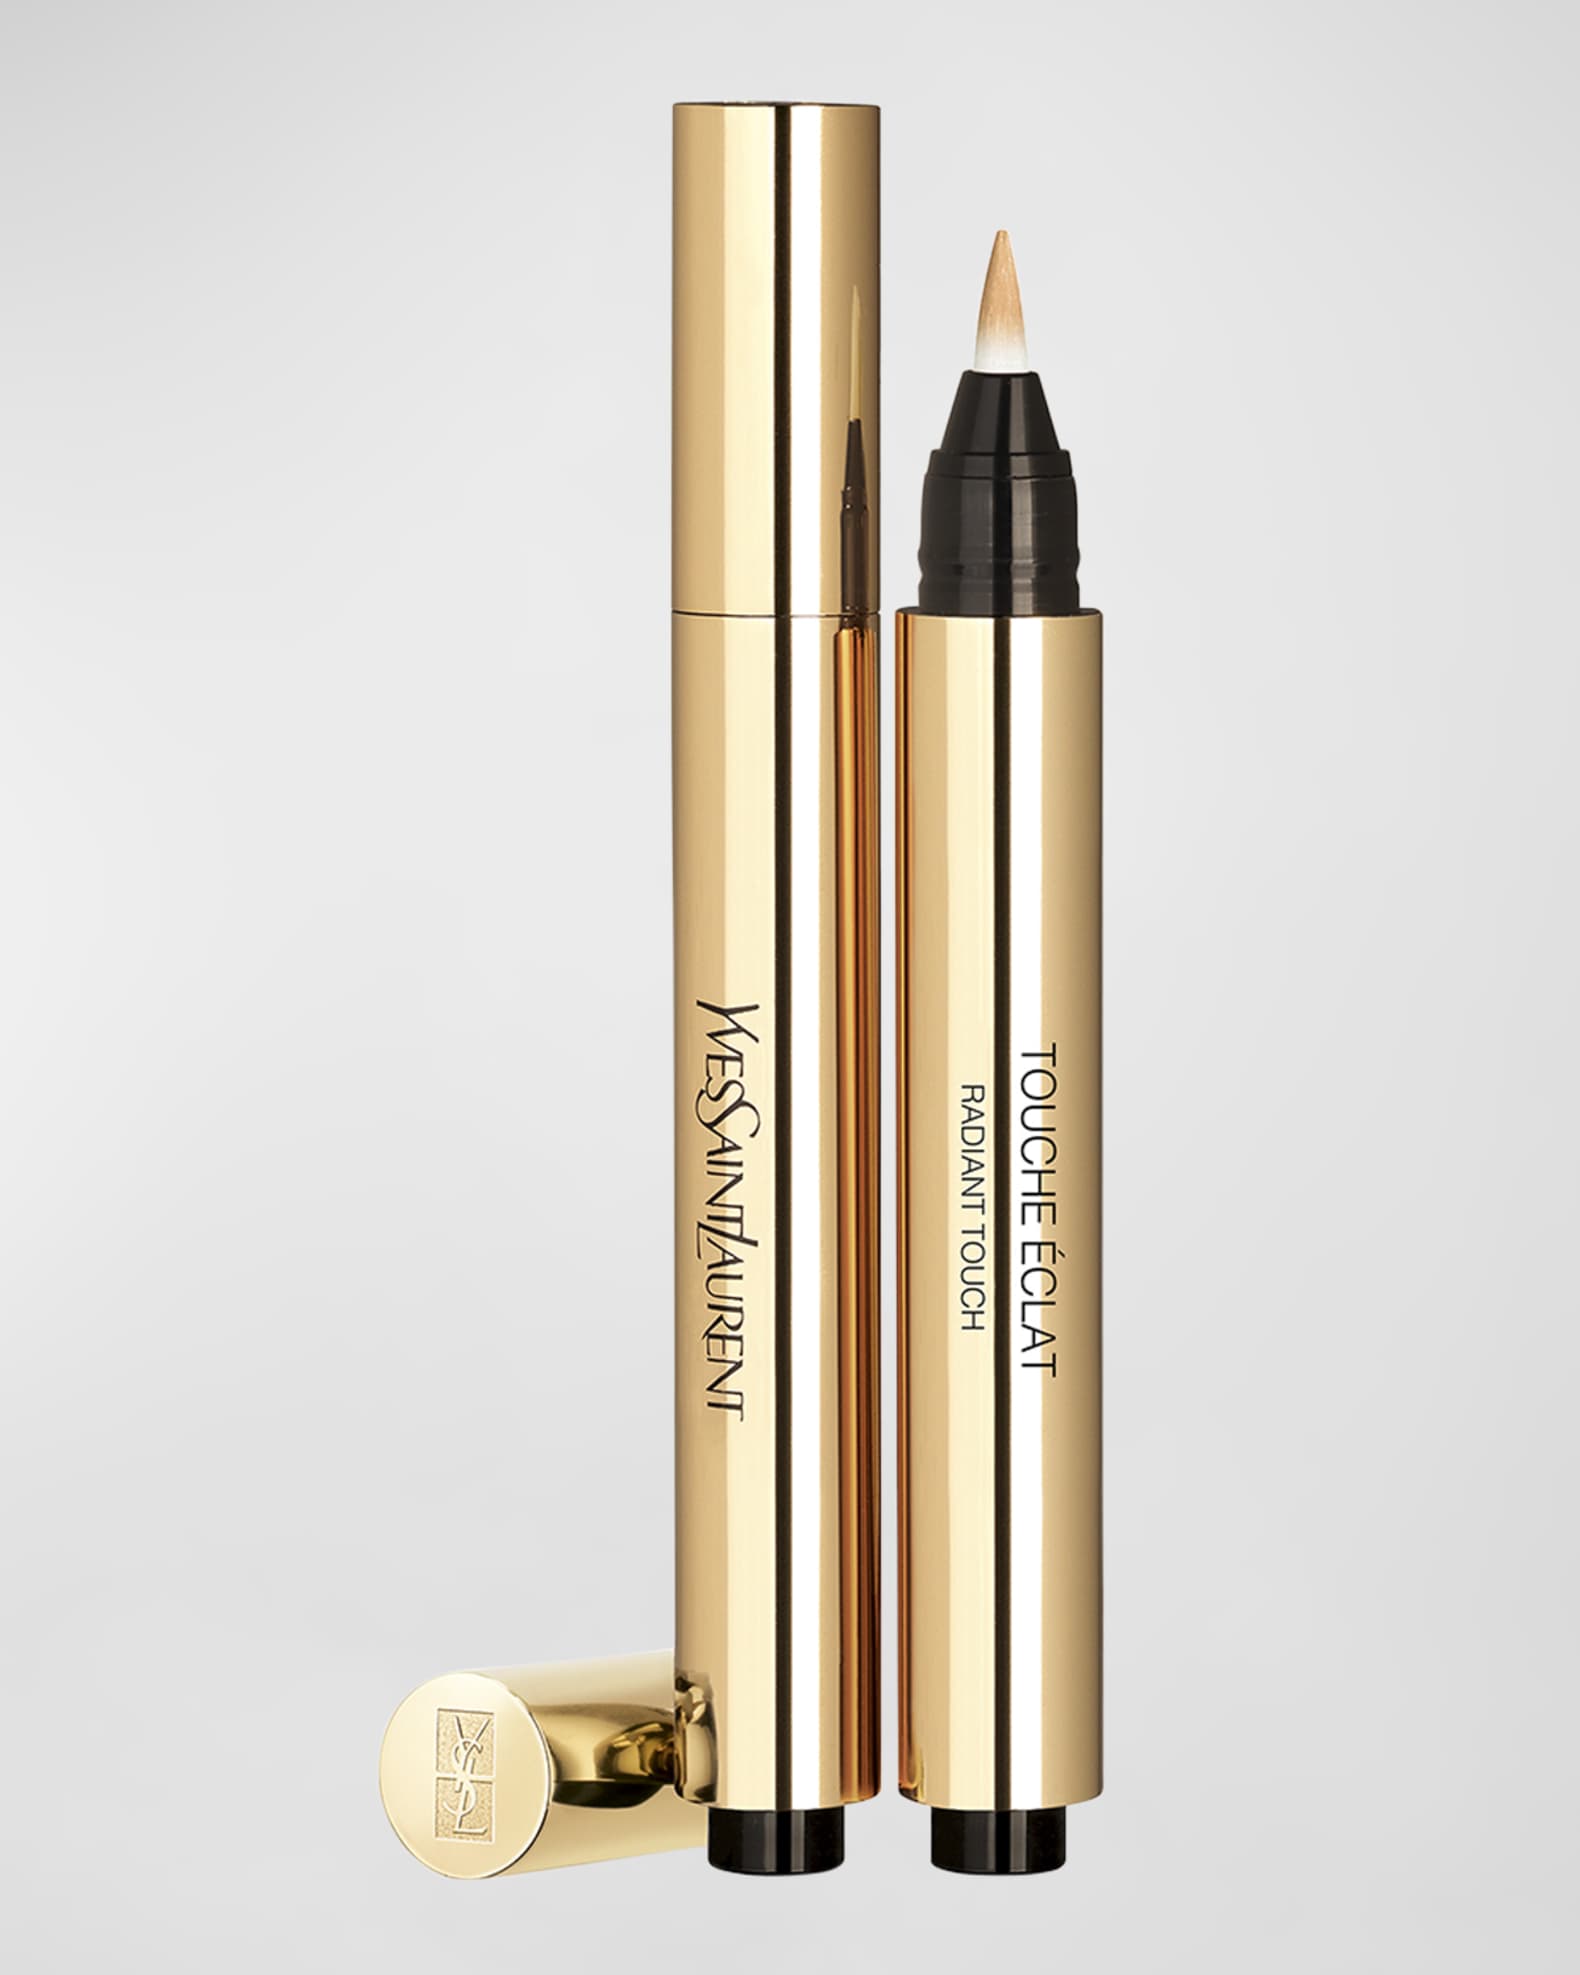 YSL Touche Eclat Radiant Touch - Worth The Hype? - Vex in the City